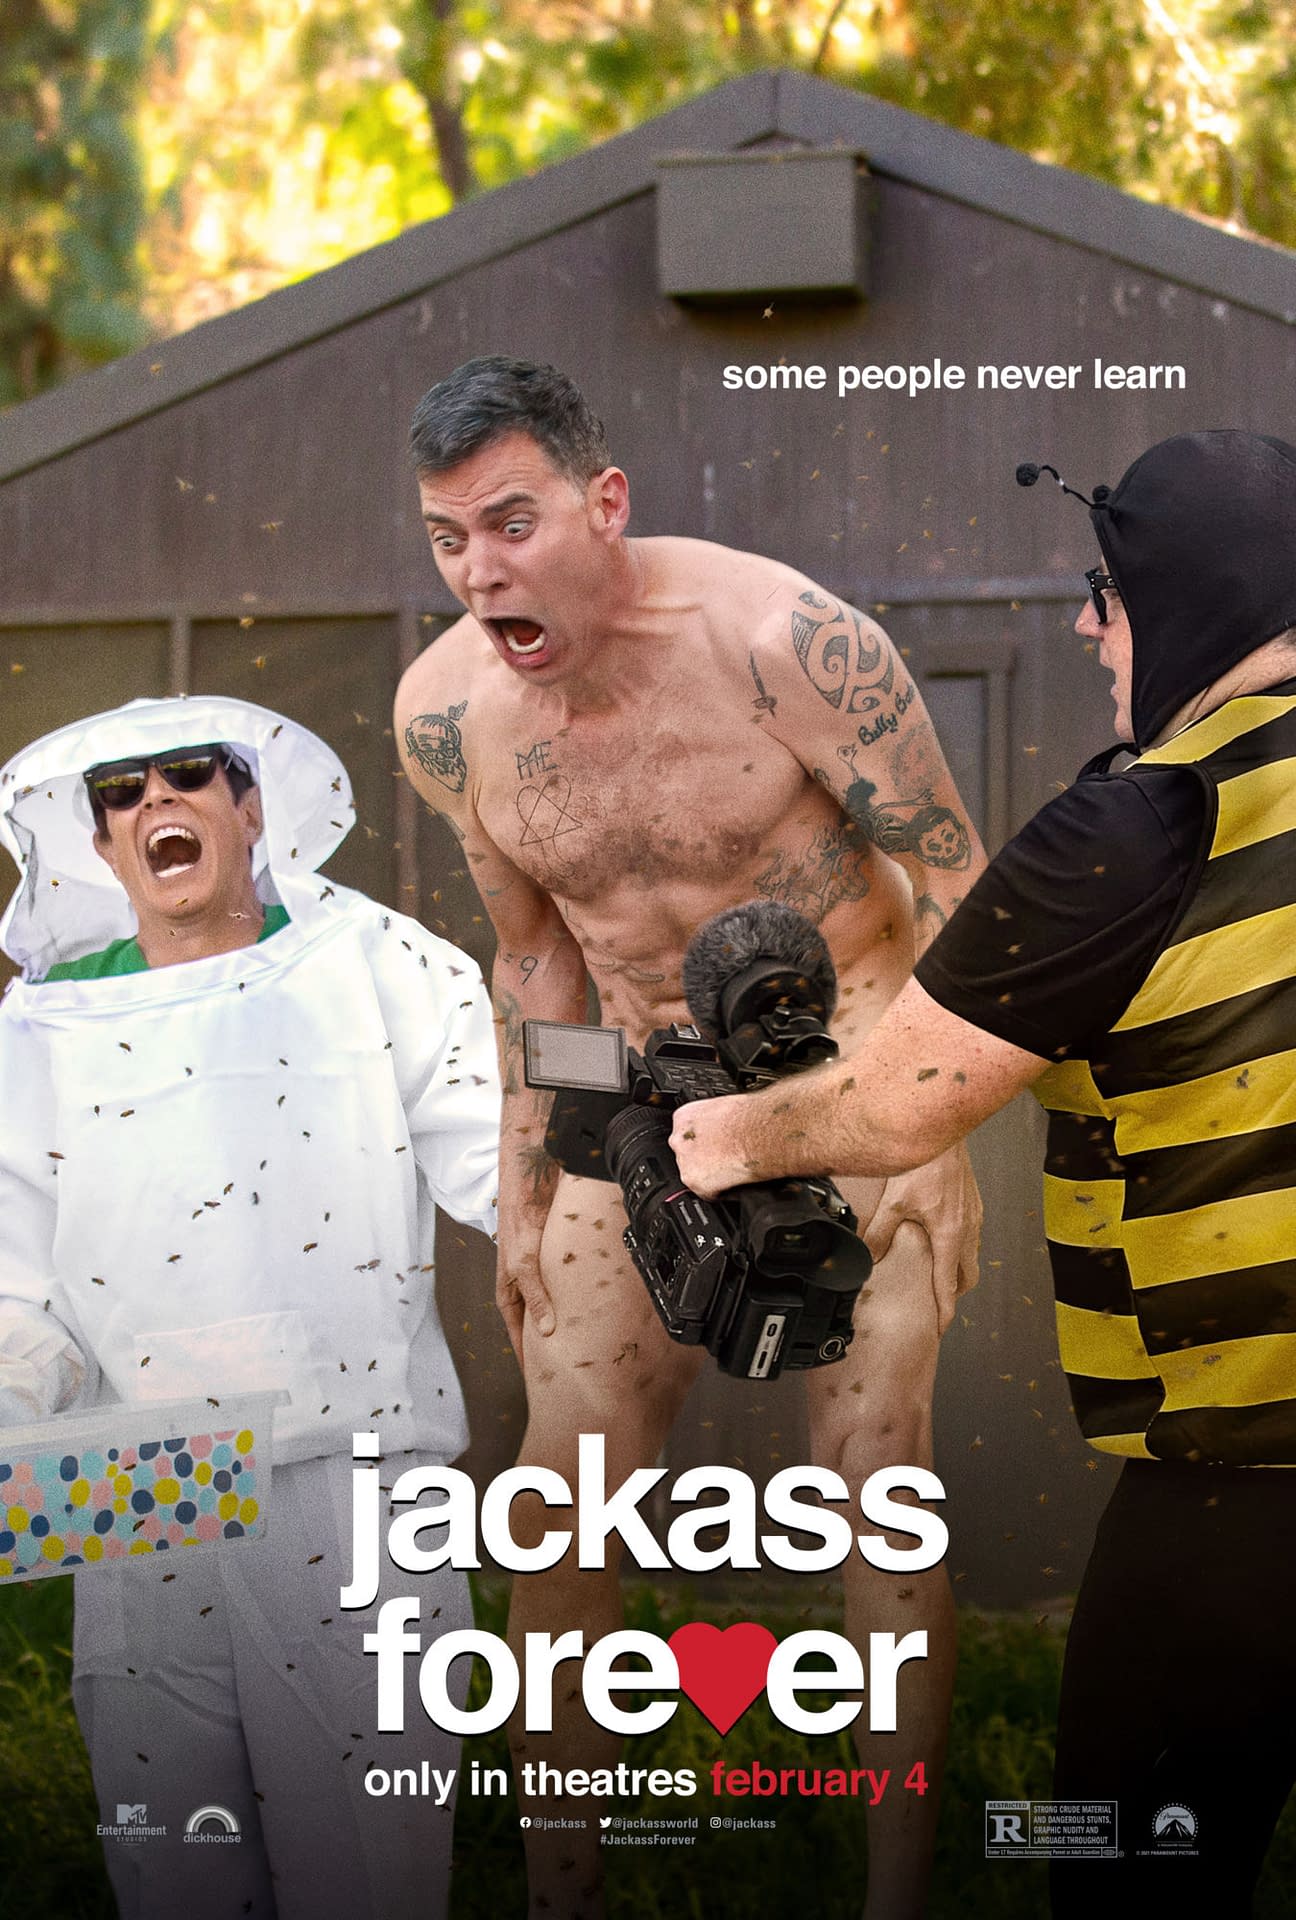 Jackass Forever Wins Weekend Box Office While Moonfall Bombs